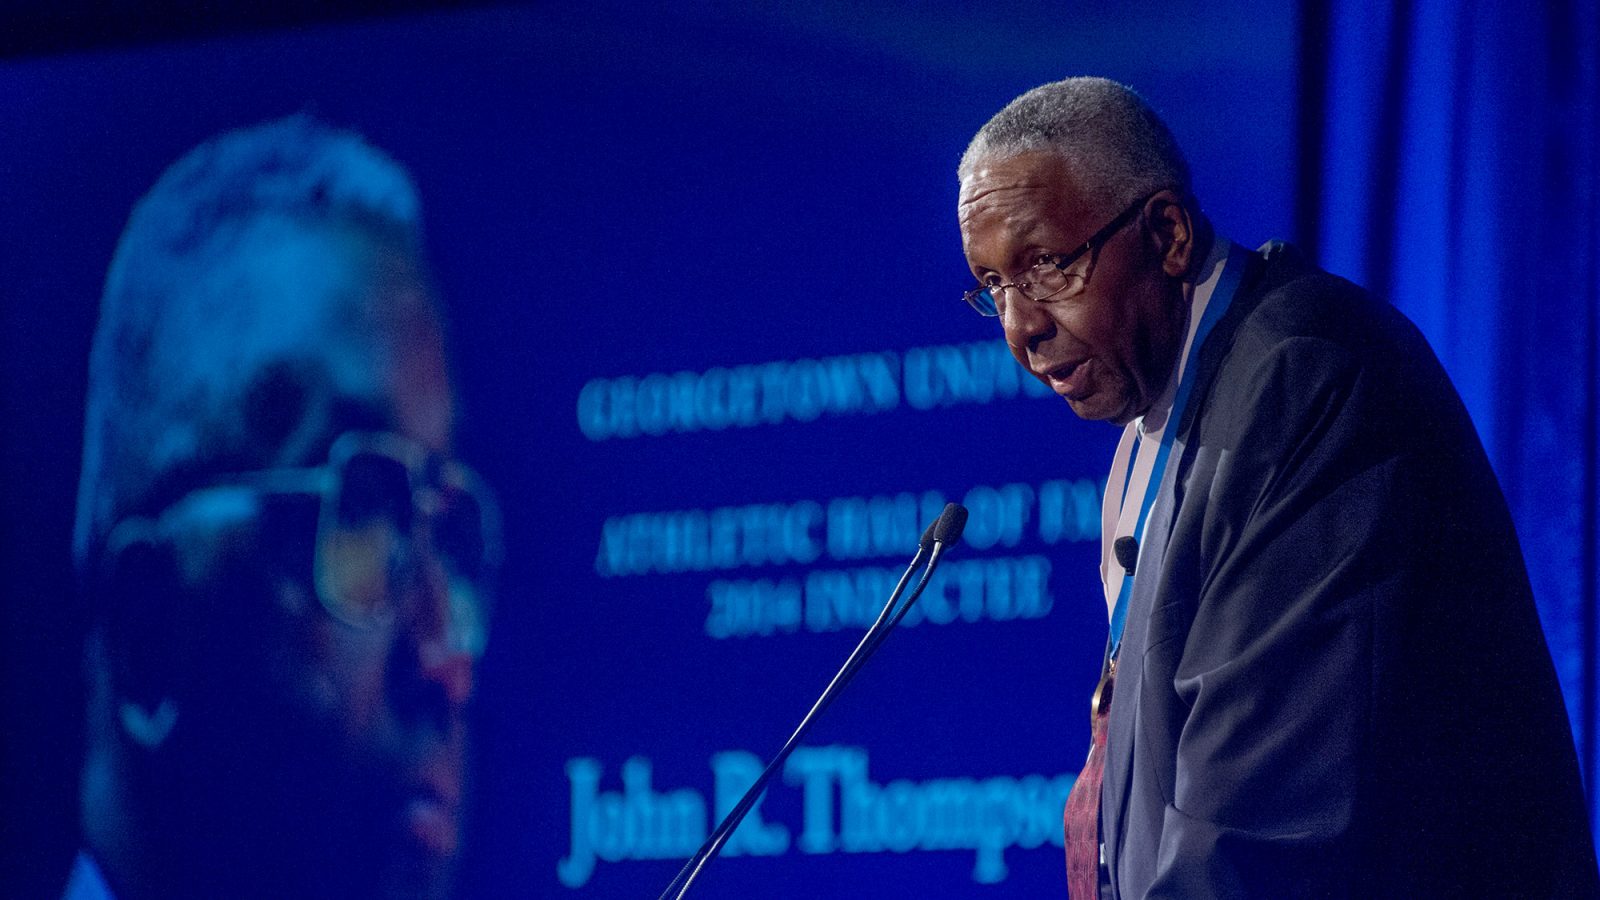 John Thompson Jr. stands on stage with a tribute to him projected in the background.